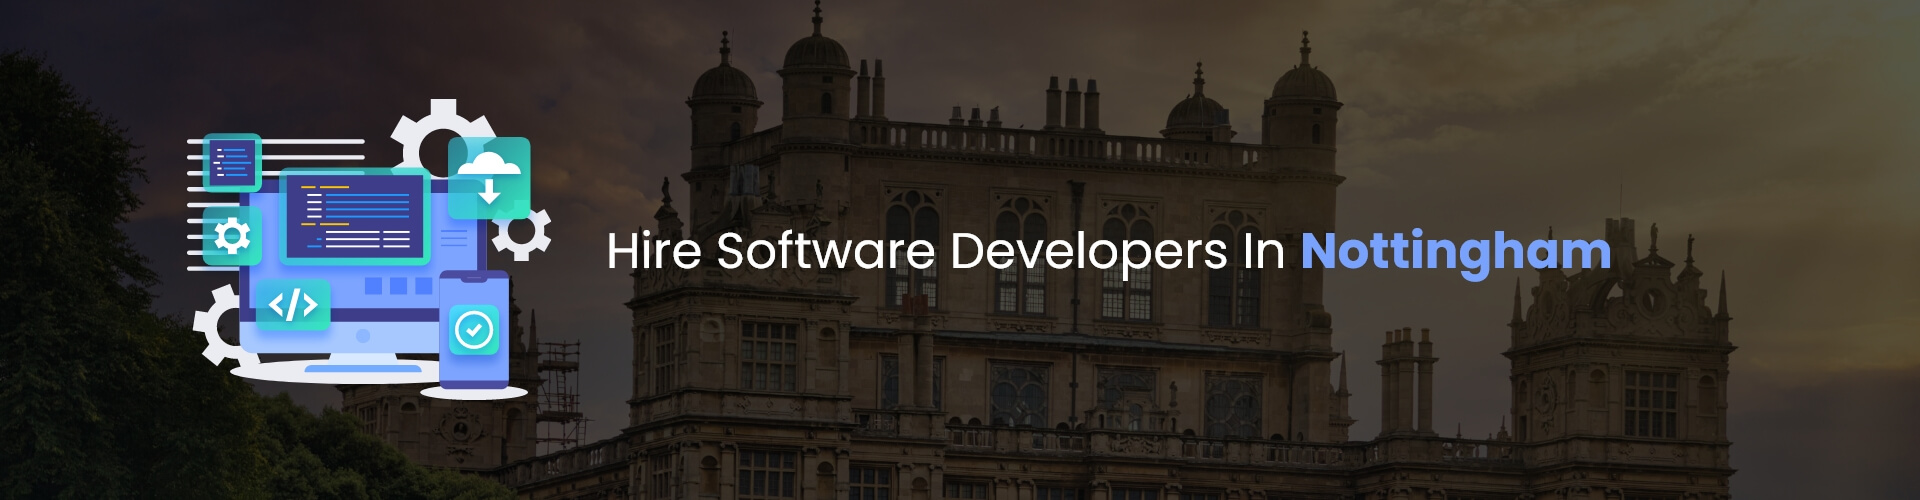 hire software developers in nottingham